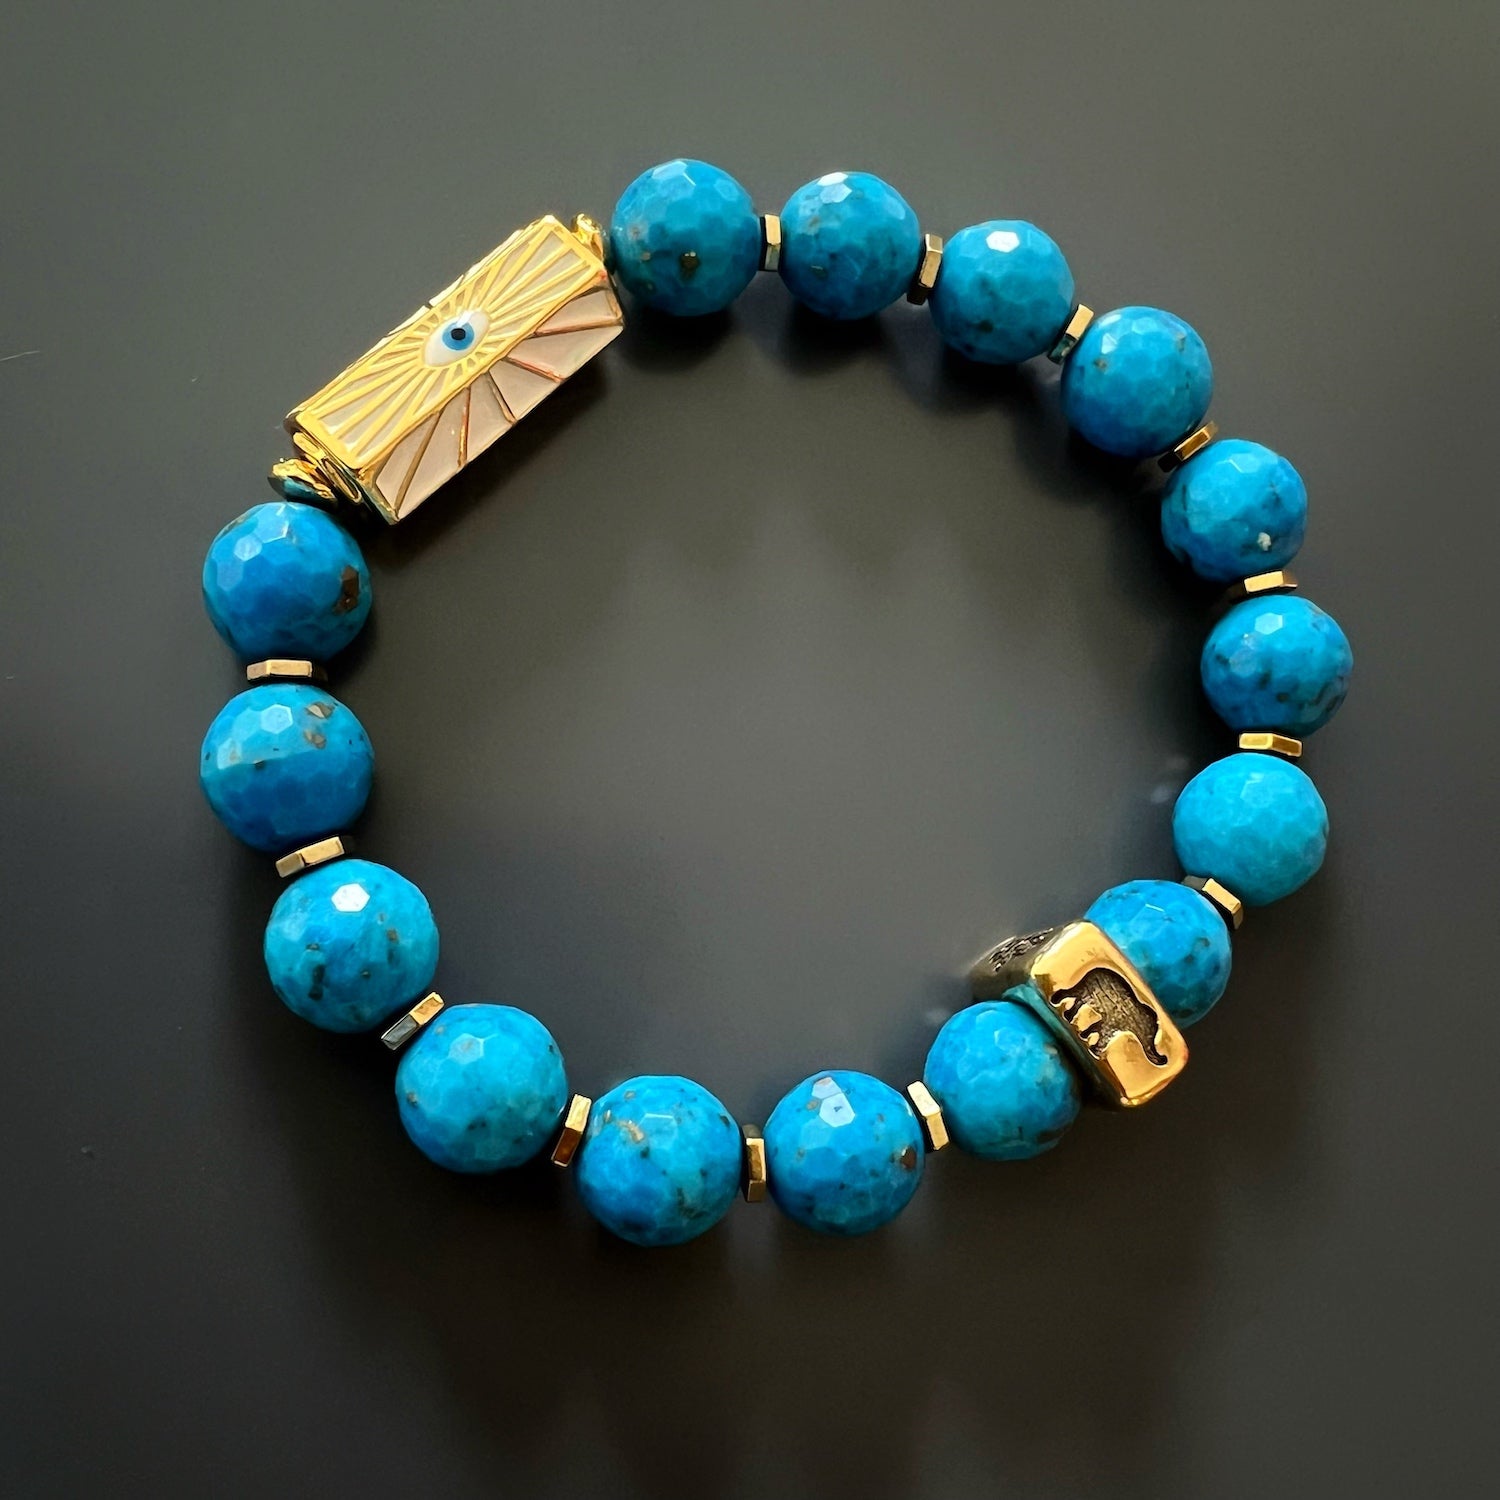 Discover the beauty and significance of the Turquoise Luck and Protection Bracelet, a handcrafted piece that brings luck and safeguards against negative energy.